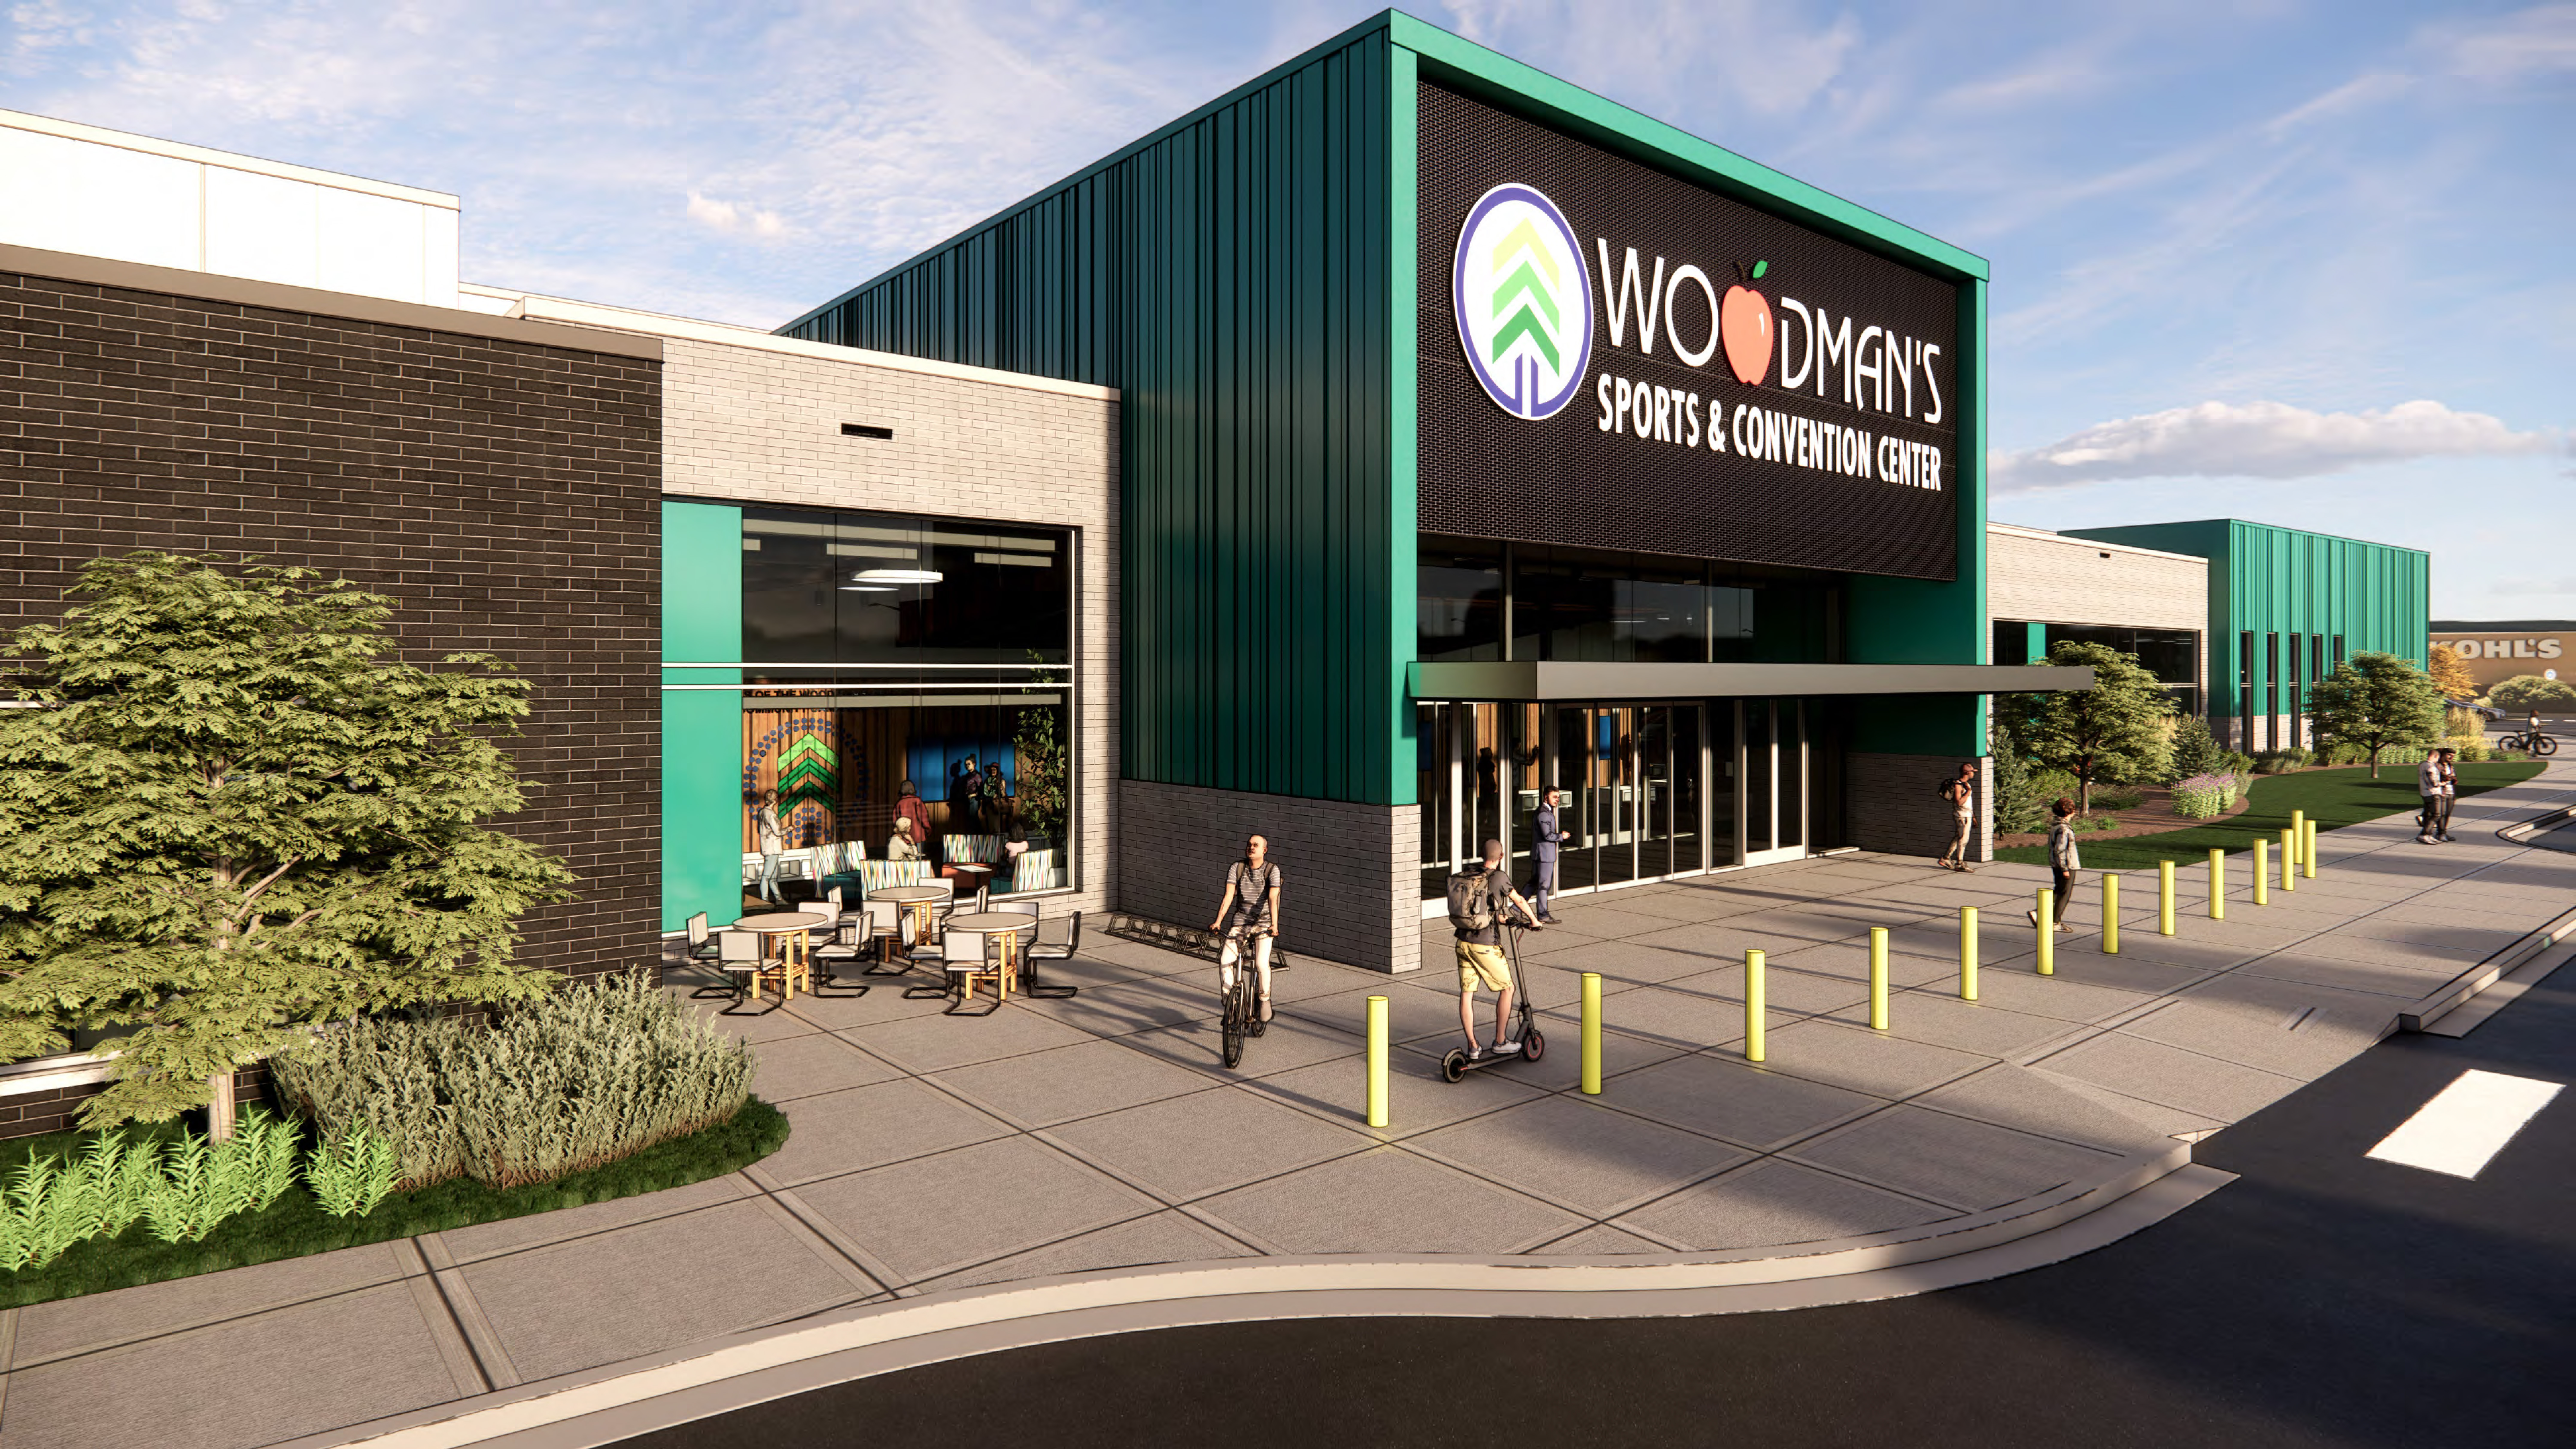 Woodman's Sports & Convention Center 8